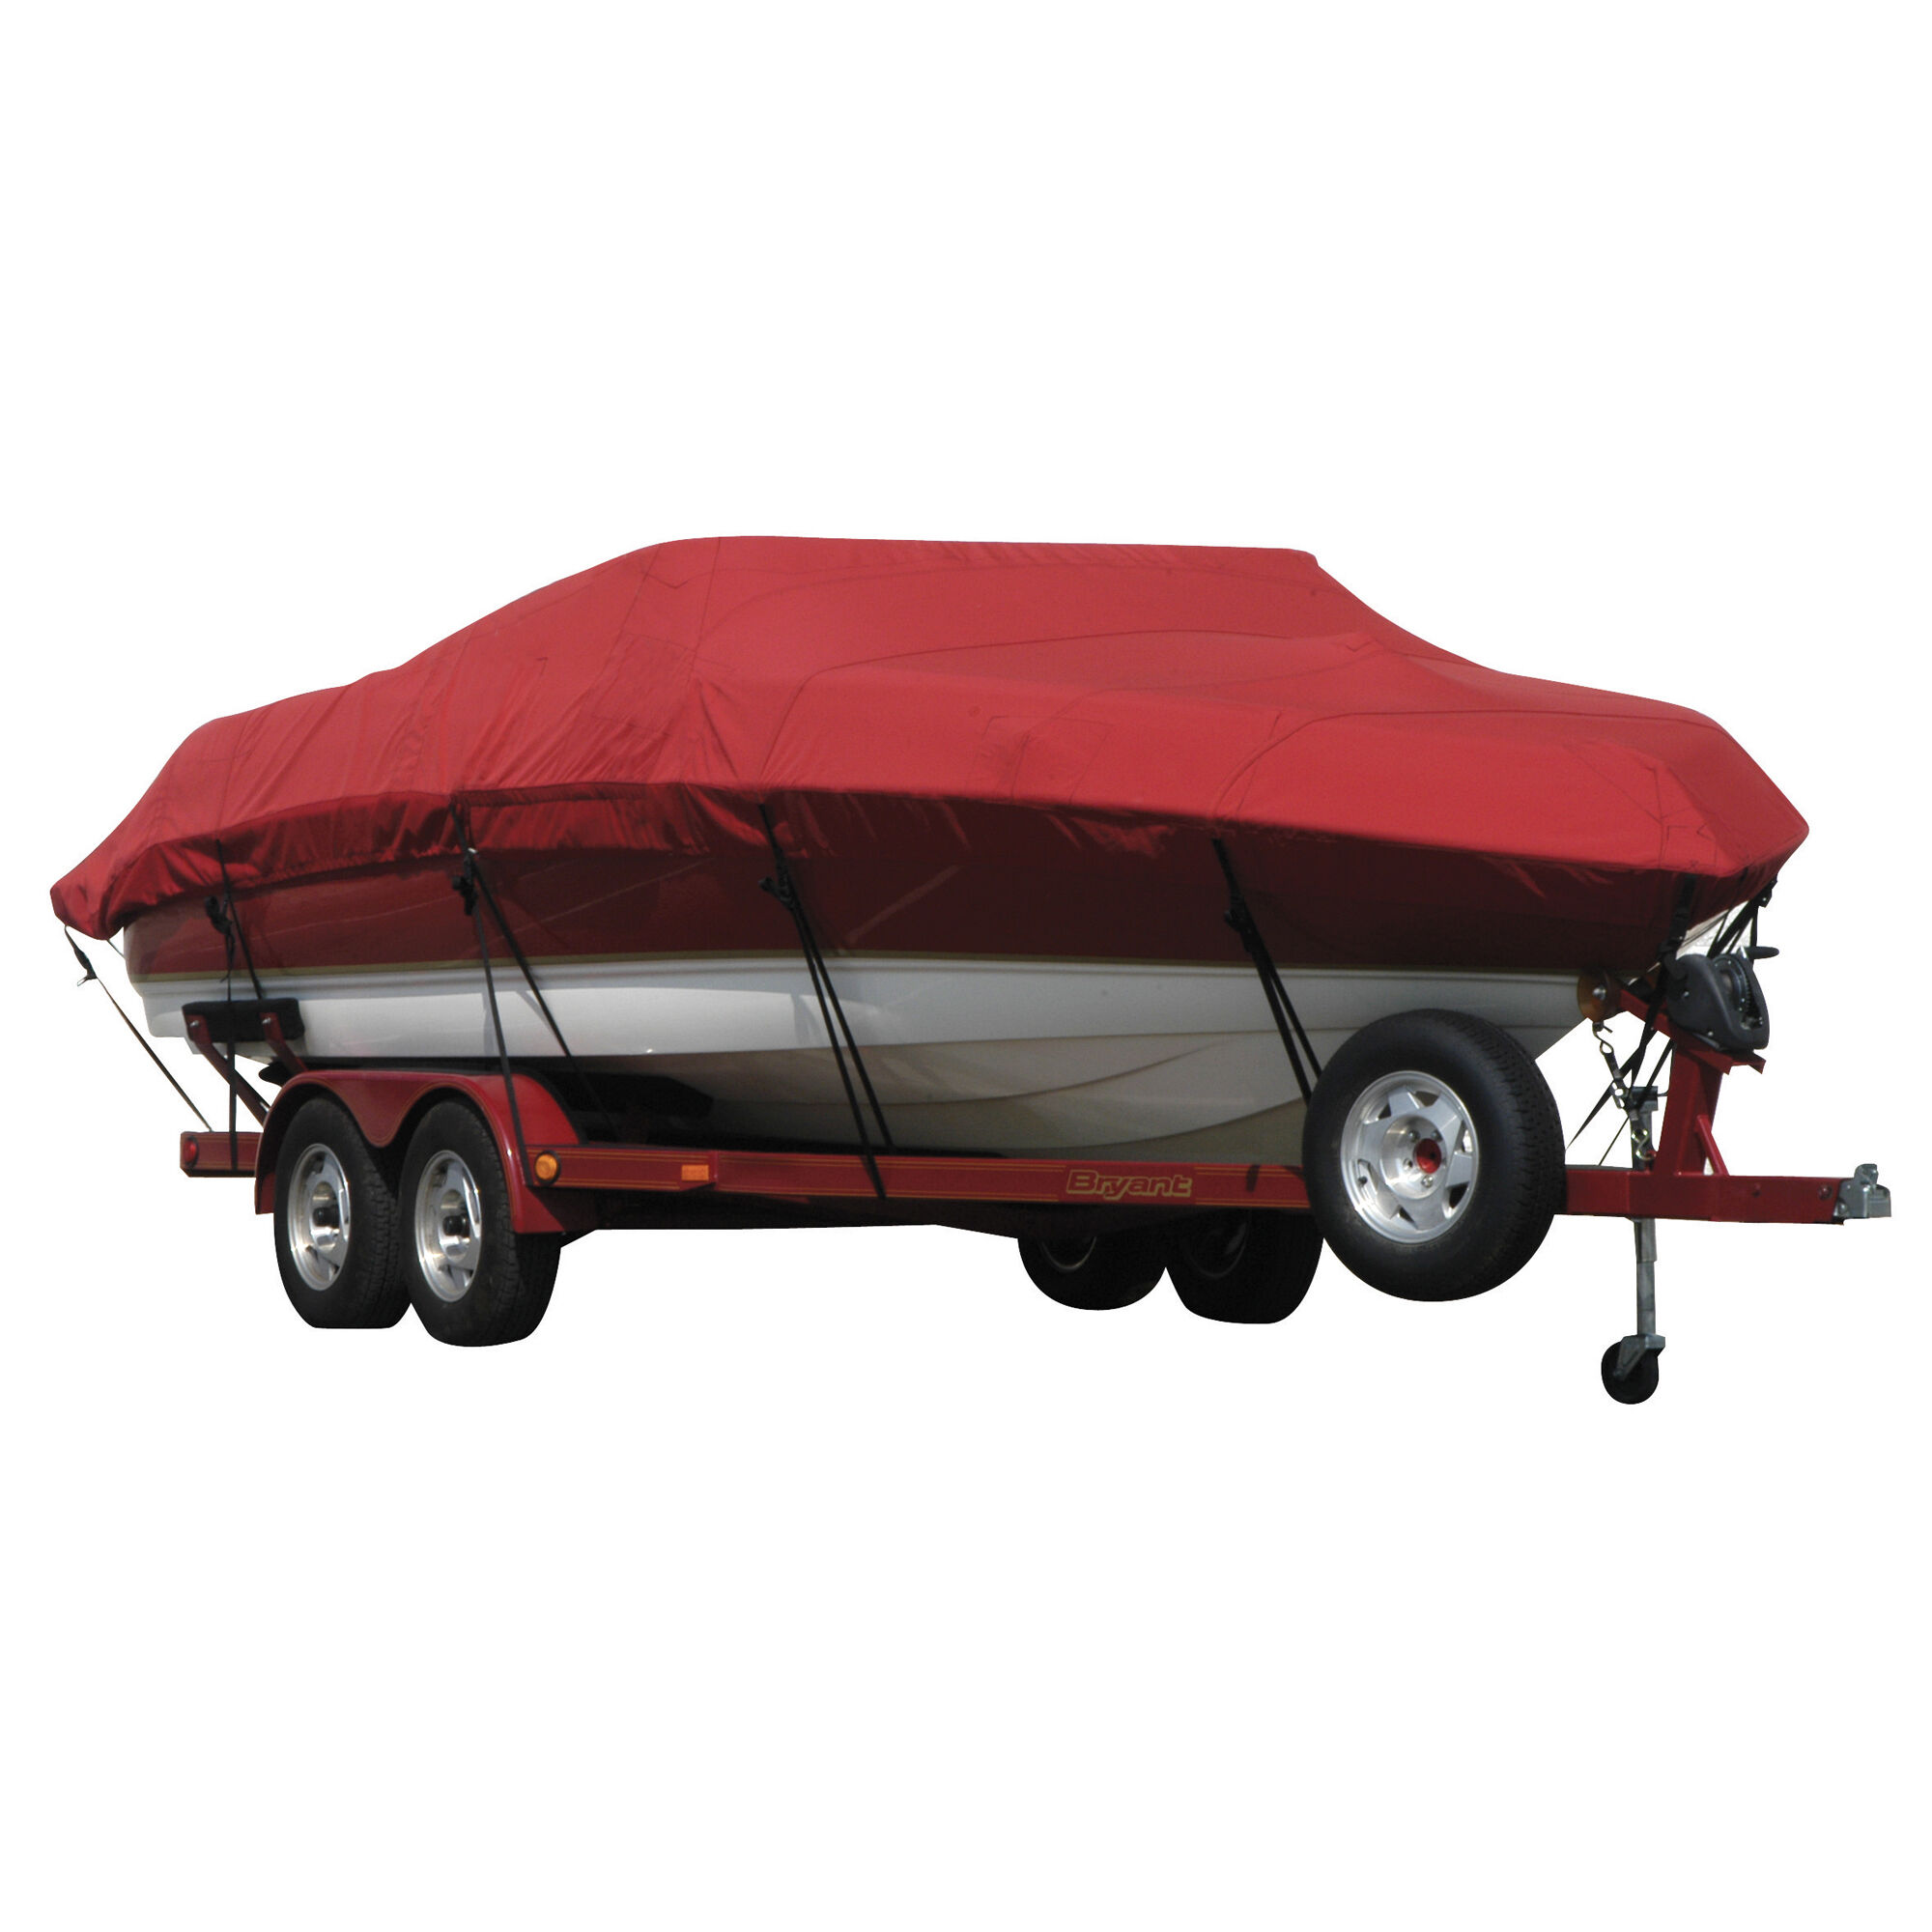 Covermate Exact Fit Sunbrella Boat Cover for Crownline 202 Lpx Sport 202 Lpx Sport Bowrider Does Not Cover PLATFORMm I/O. Red